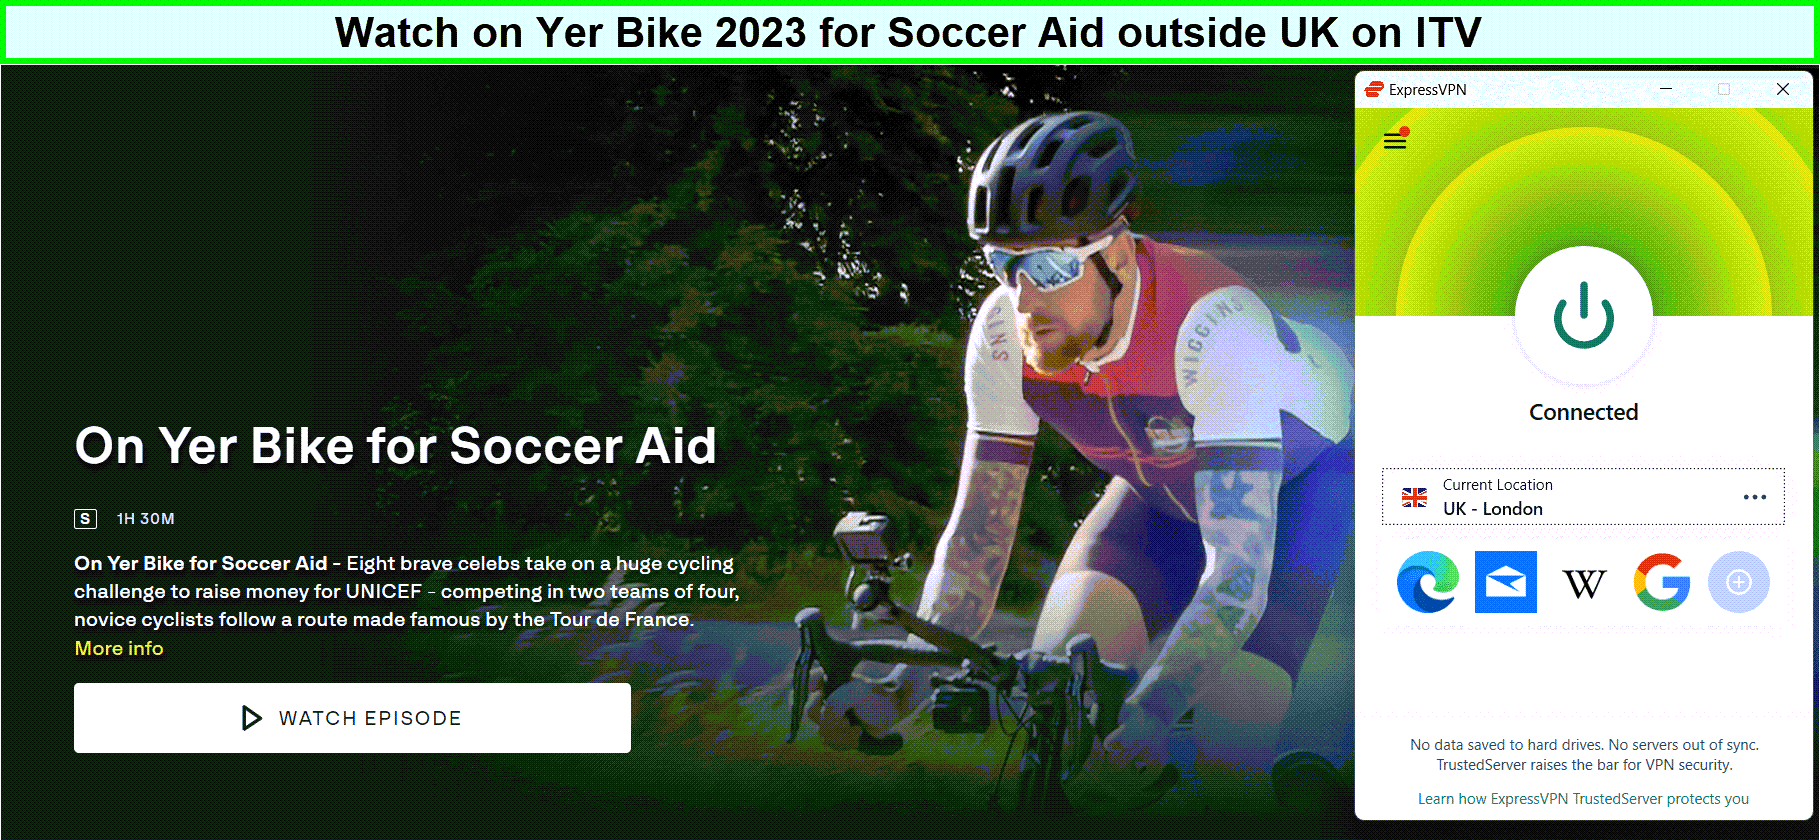 Watch-On-Yer-Bike-2023-for-Soccer-Aid-in-South Korea-on-ITV-with-ExpressVPN